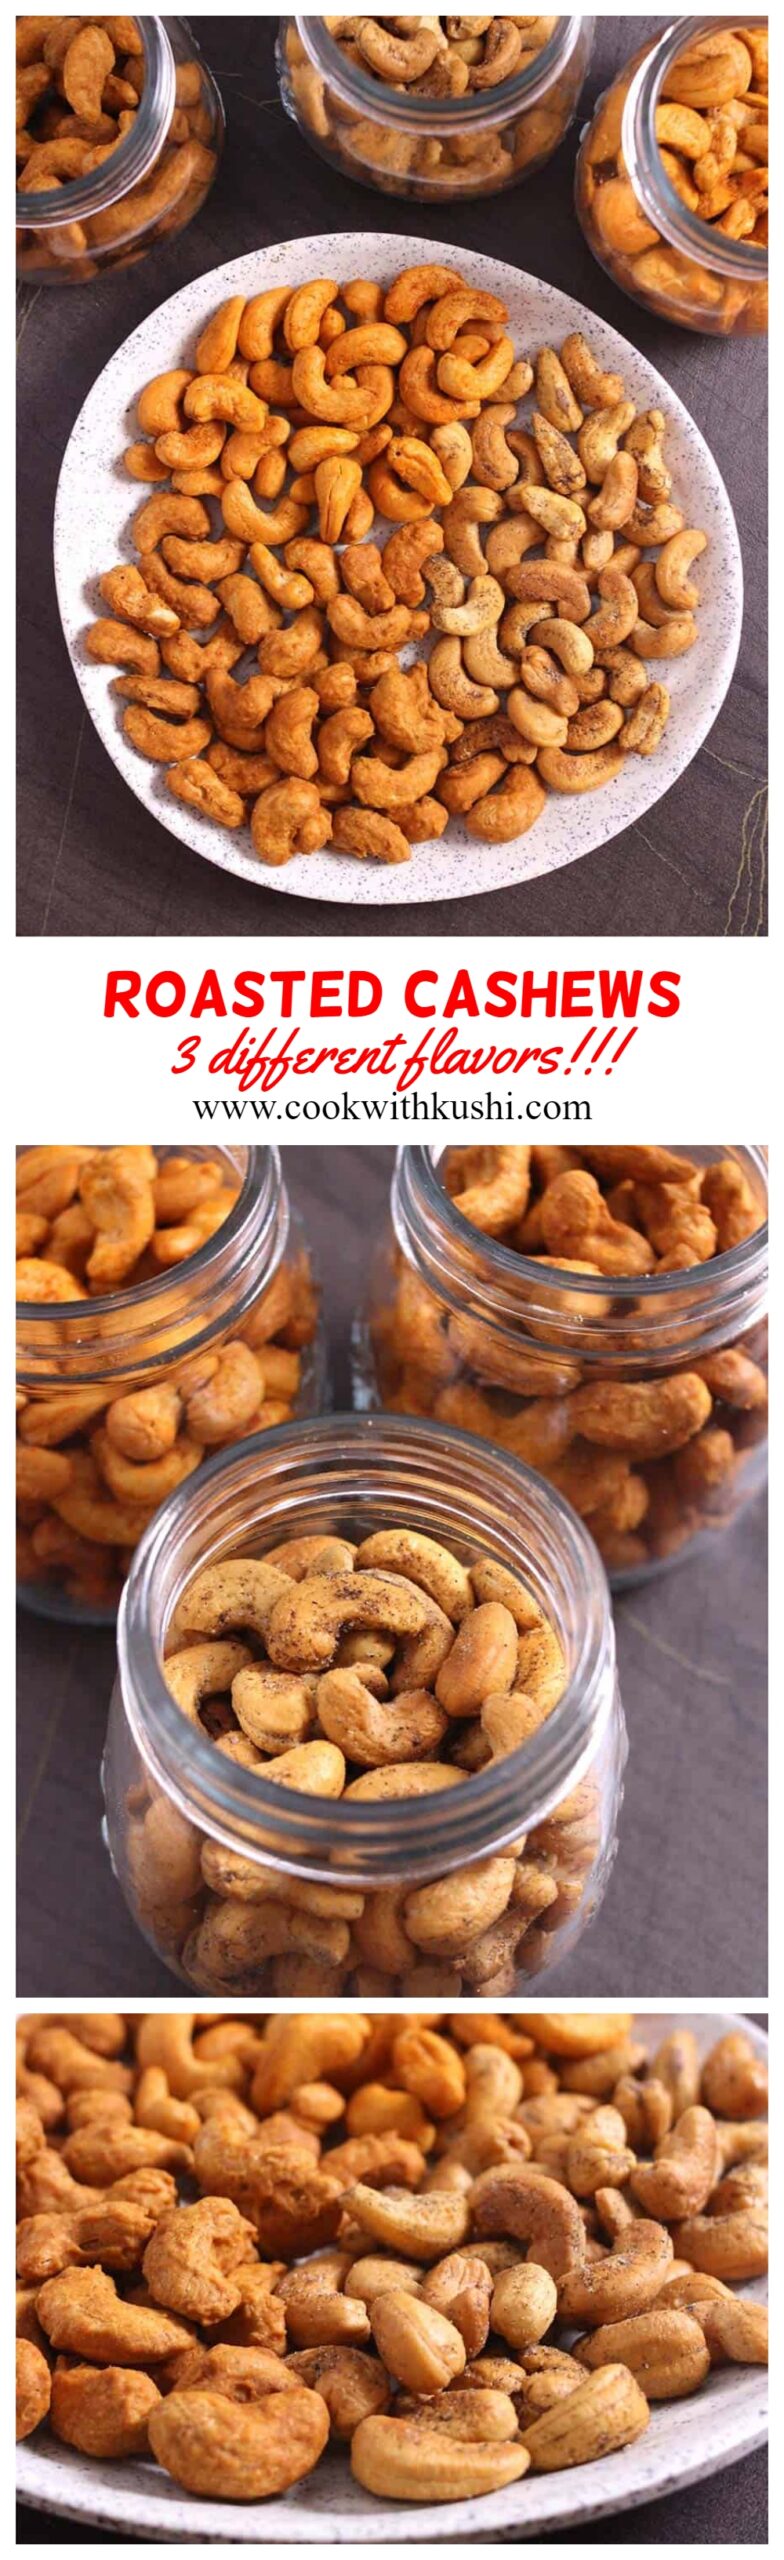 Roasted Cashews or Masala Kaju are a crispy, addictive, and delicious snack to munch anytime & anywhere 🙂 #snacks #cashews #airfryer #baked #diwali #christmas